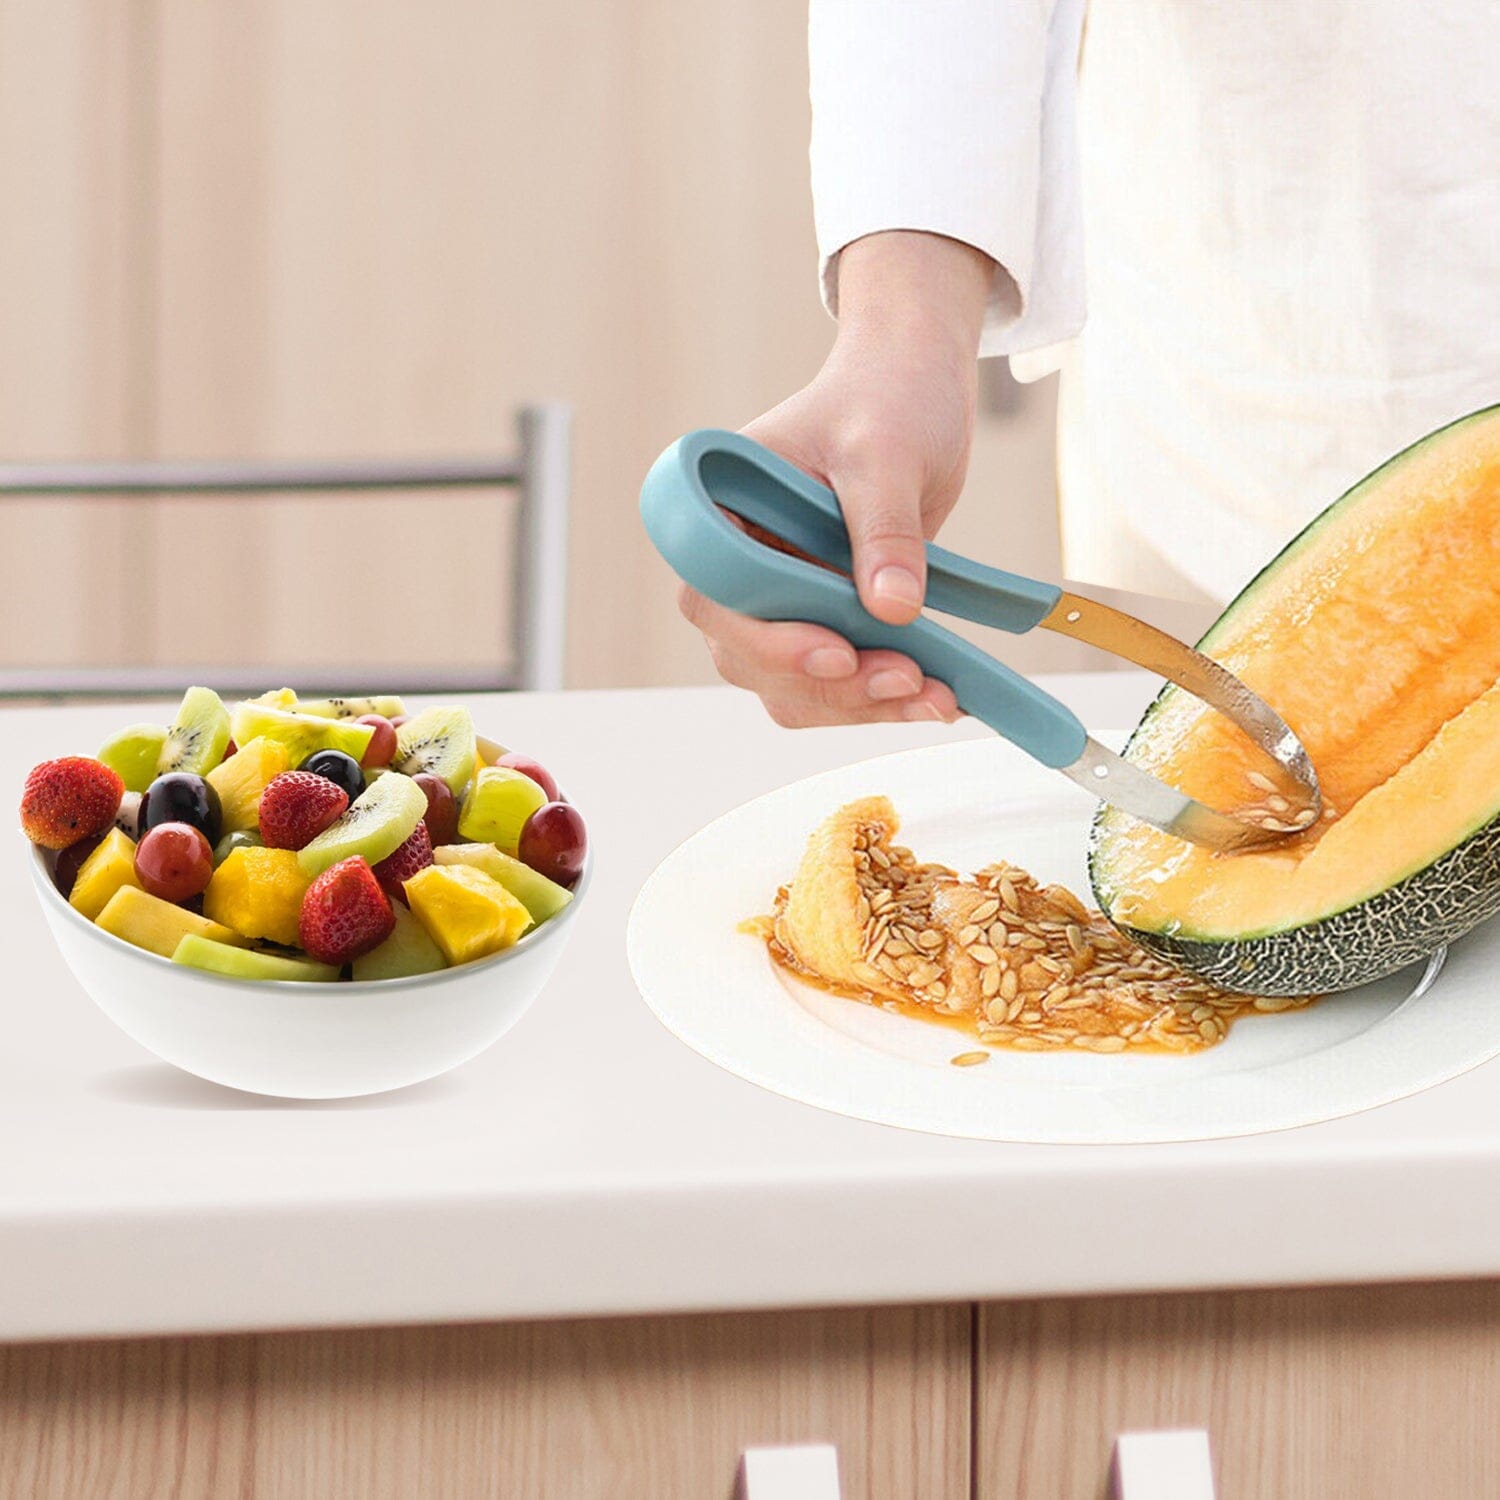 https://dailysale.com/cdn/shop/files/professional-3-in-1-stainless-steel-watermelon-melon-baller-scoop-seed-remover-fruit-carving-tool-set-kitchen-tools-gadgets-dailysale-566352.jpg?v=1698352351